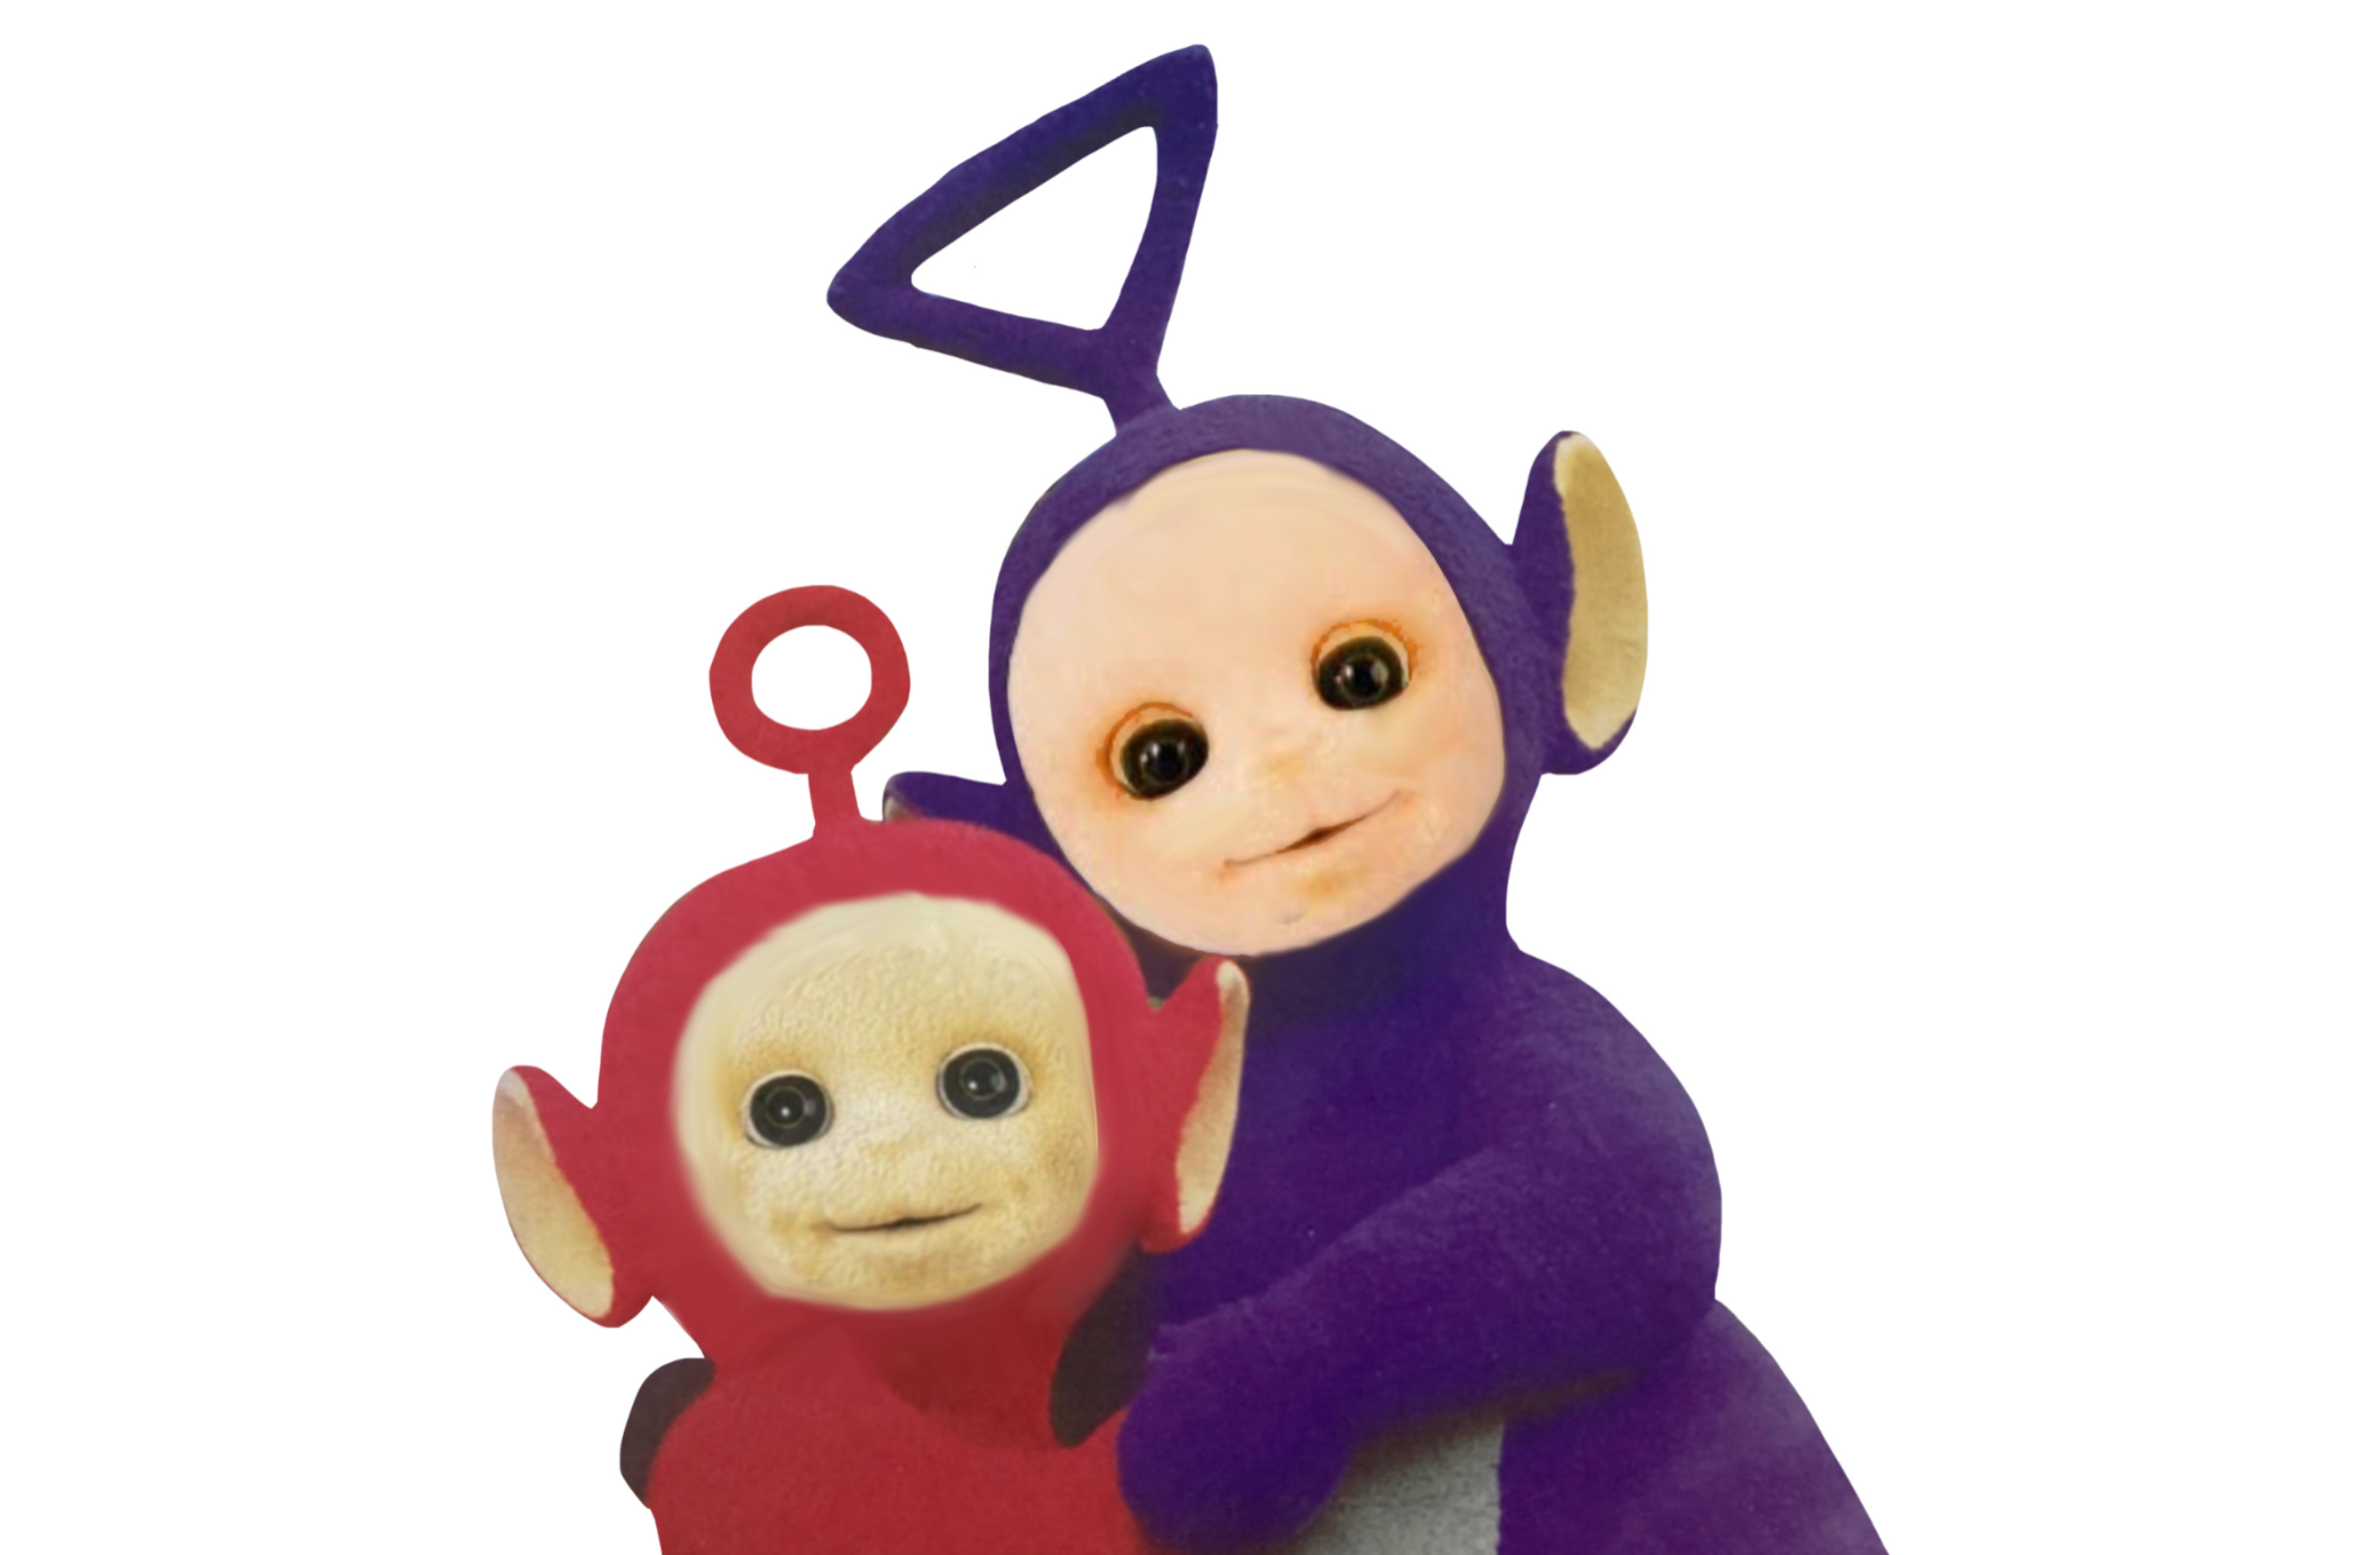 Teletubbies) Tinky Winky And Po Big Hug By Mcdnalds2016 On Deviantart